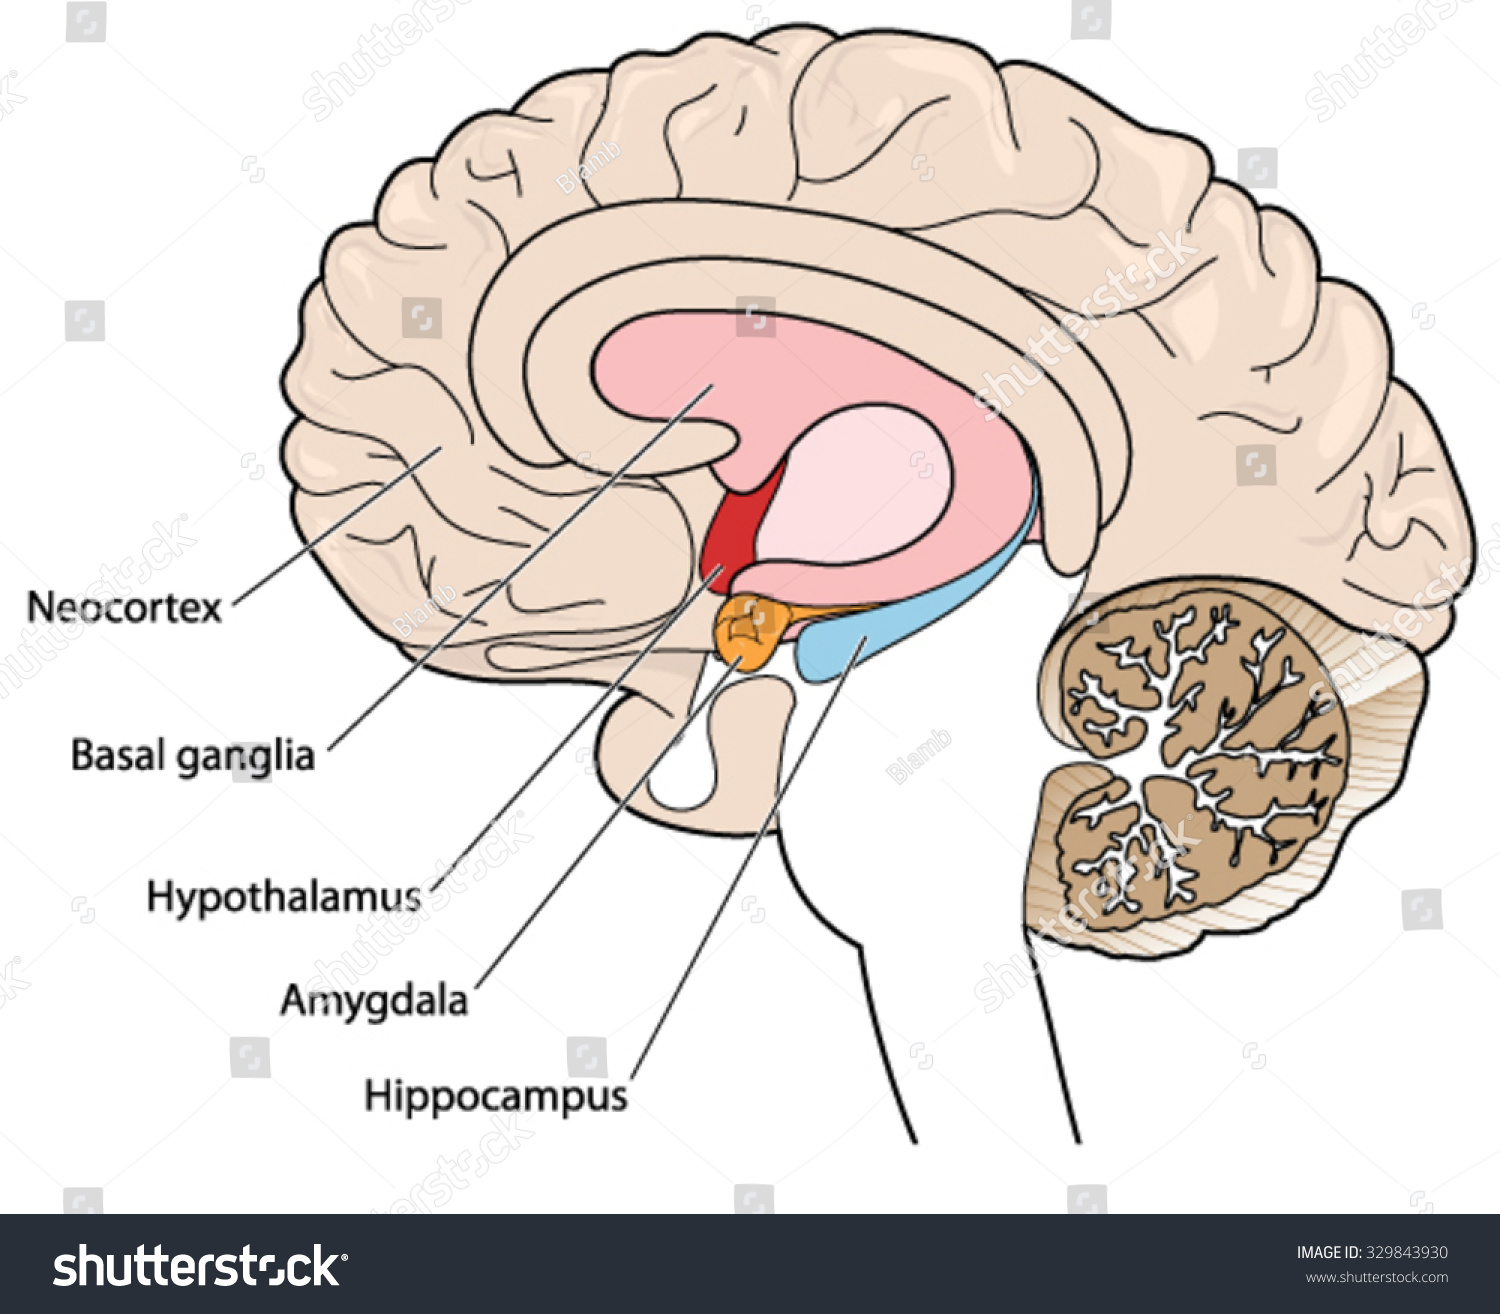 SVG of The brain in cross section showing the basal ganglia, hypothalamus, amygdala and hippocampus svg